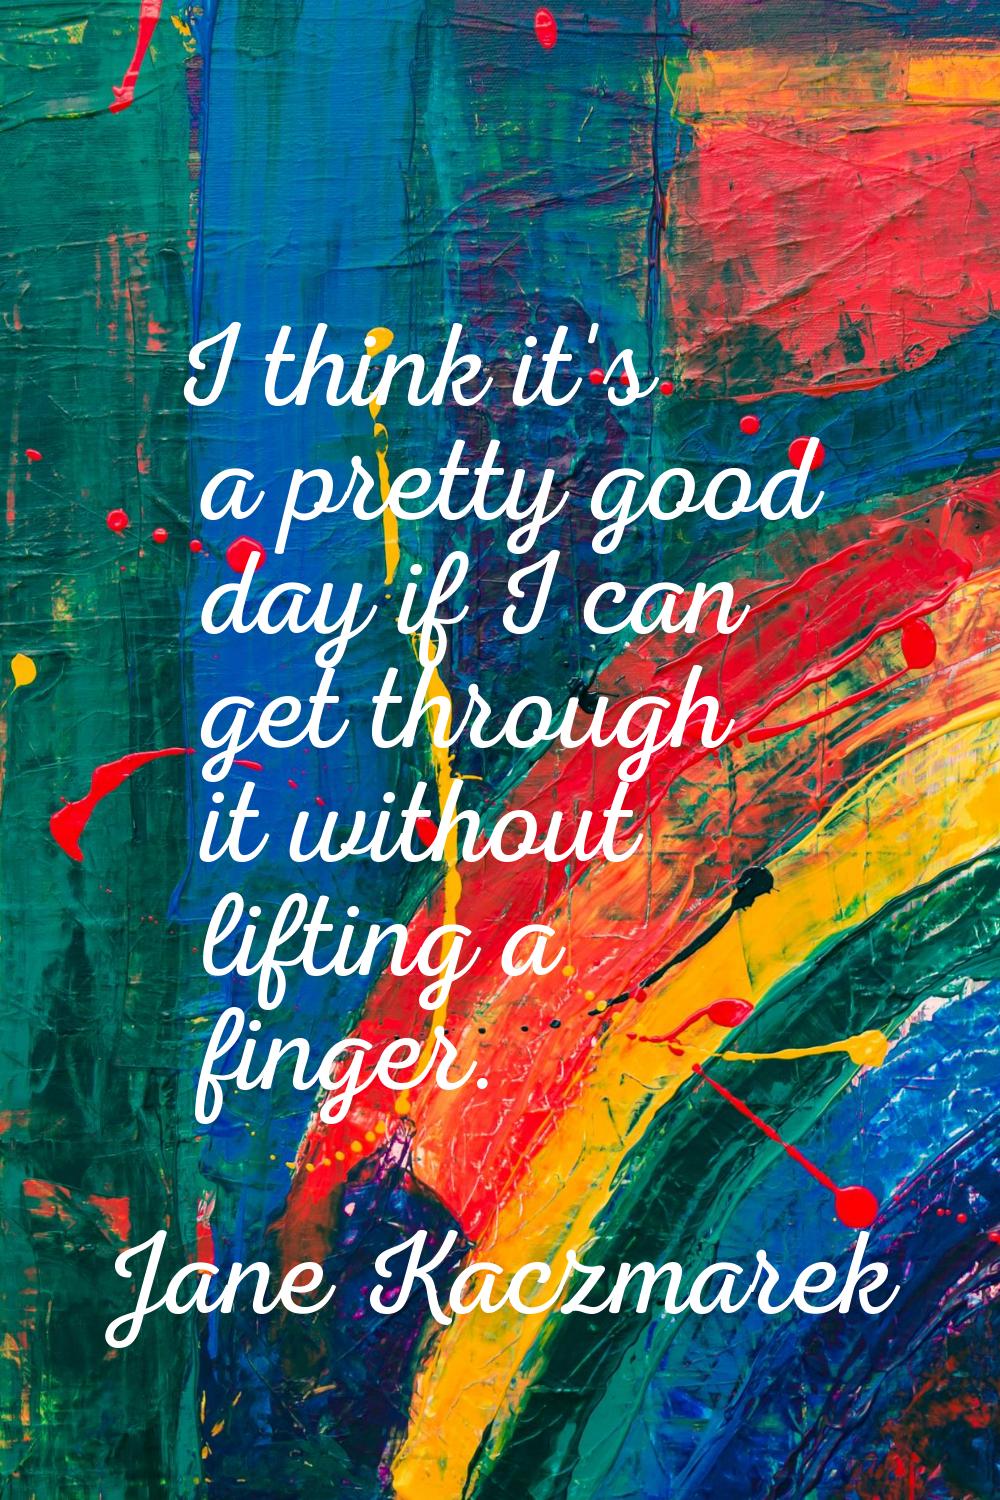 I think it's a pretty good day if I can get through it without lifting a finger.